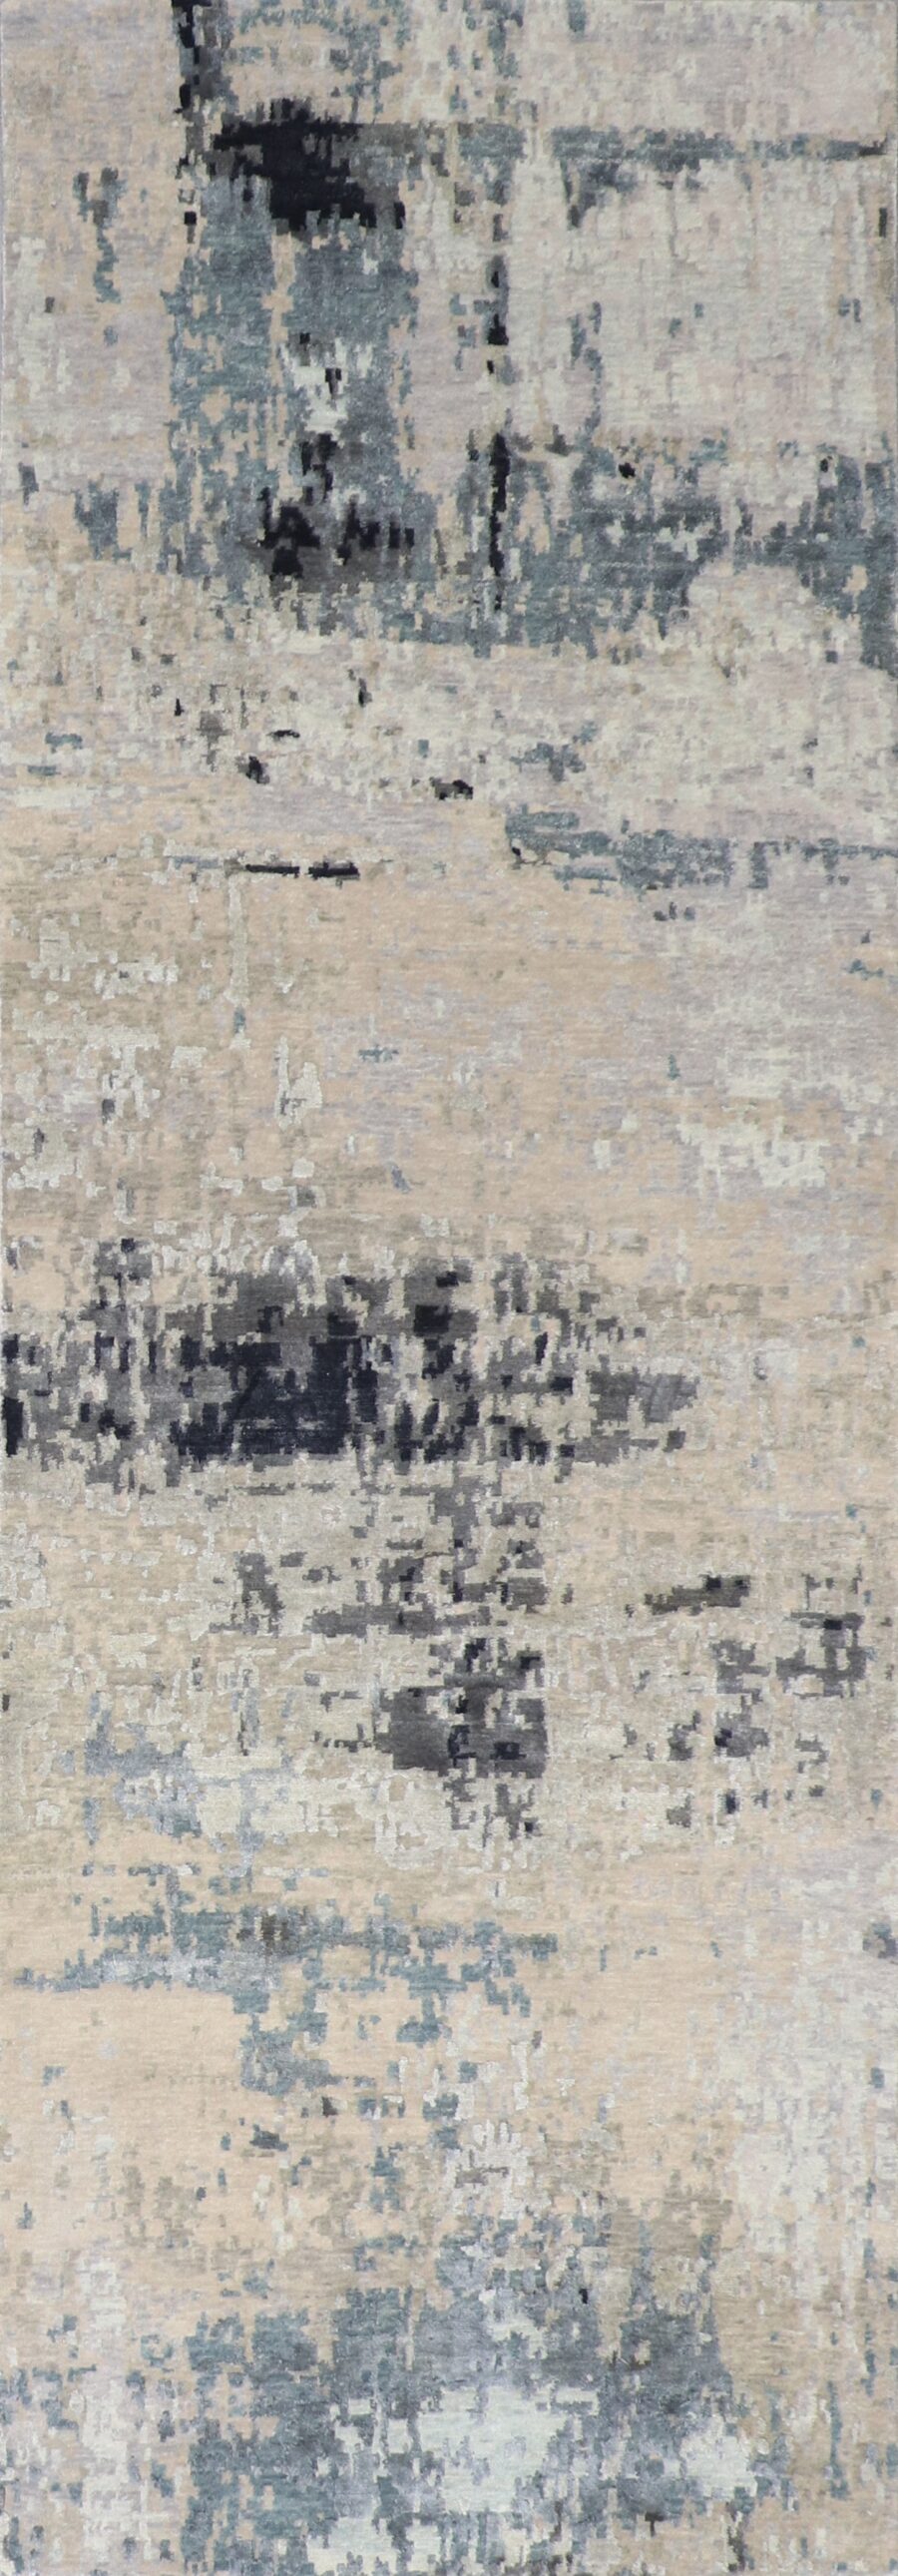 4’x11’10” Contemporary Tan&Gray & Blue Wool & Silk Hand-Knotted Rug - Direct Rug Import | Rugs in Chicago, Indiana,South Bend,Granger